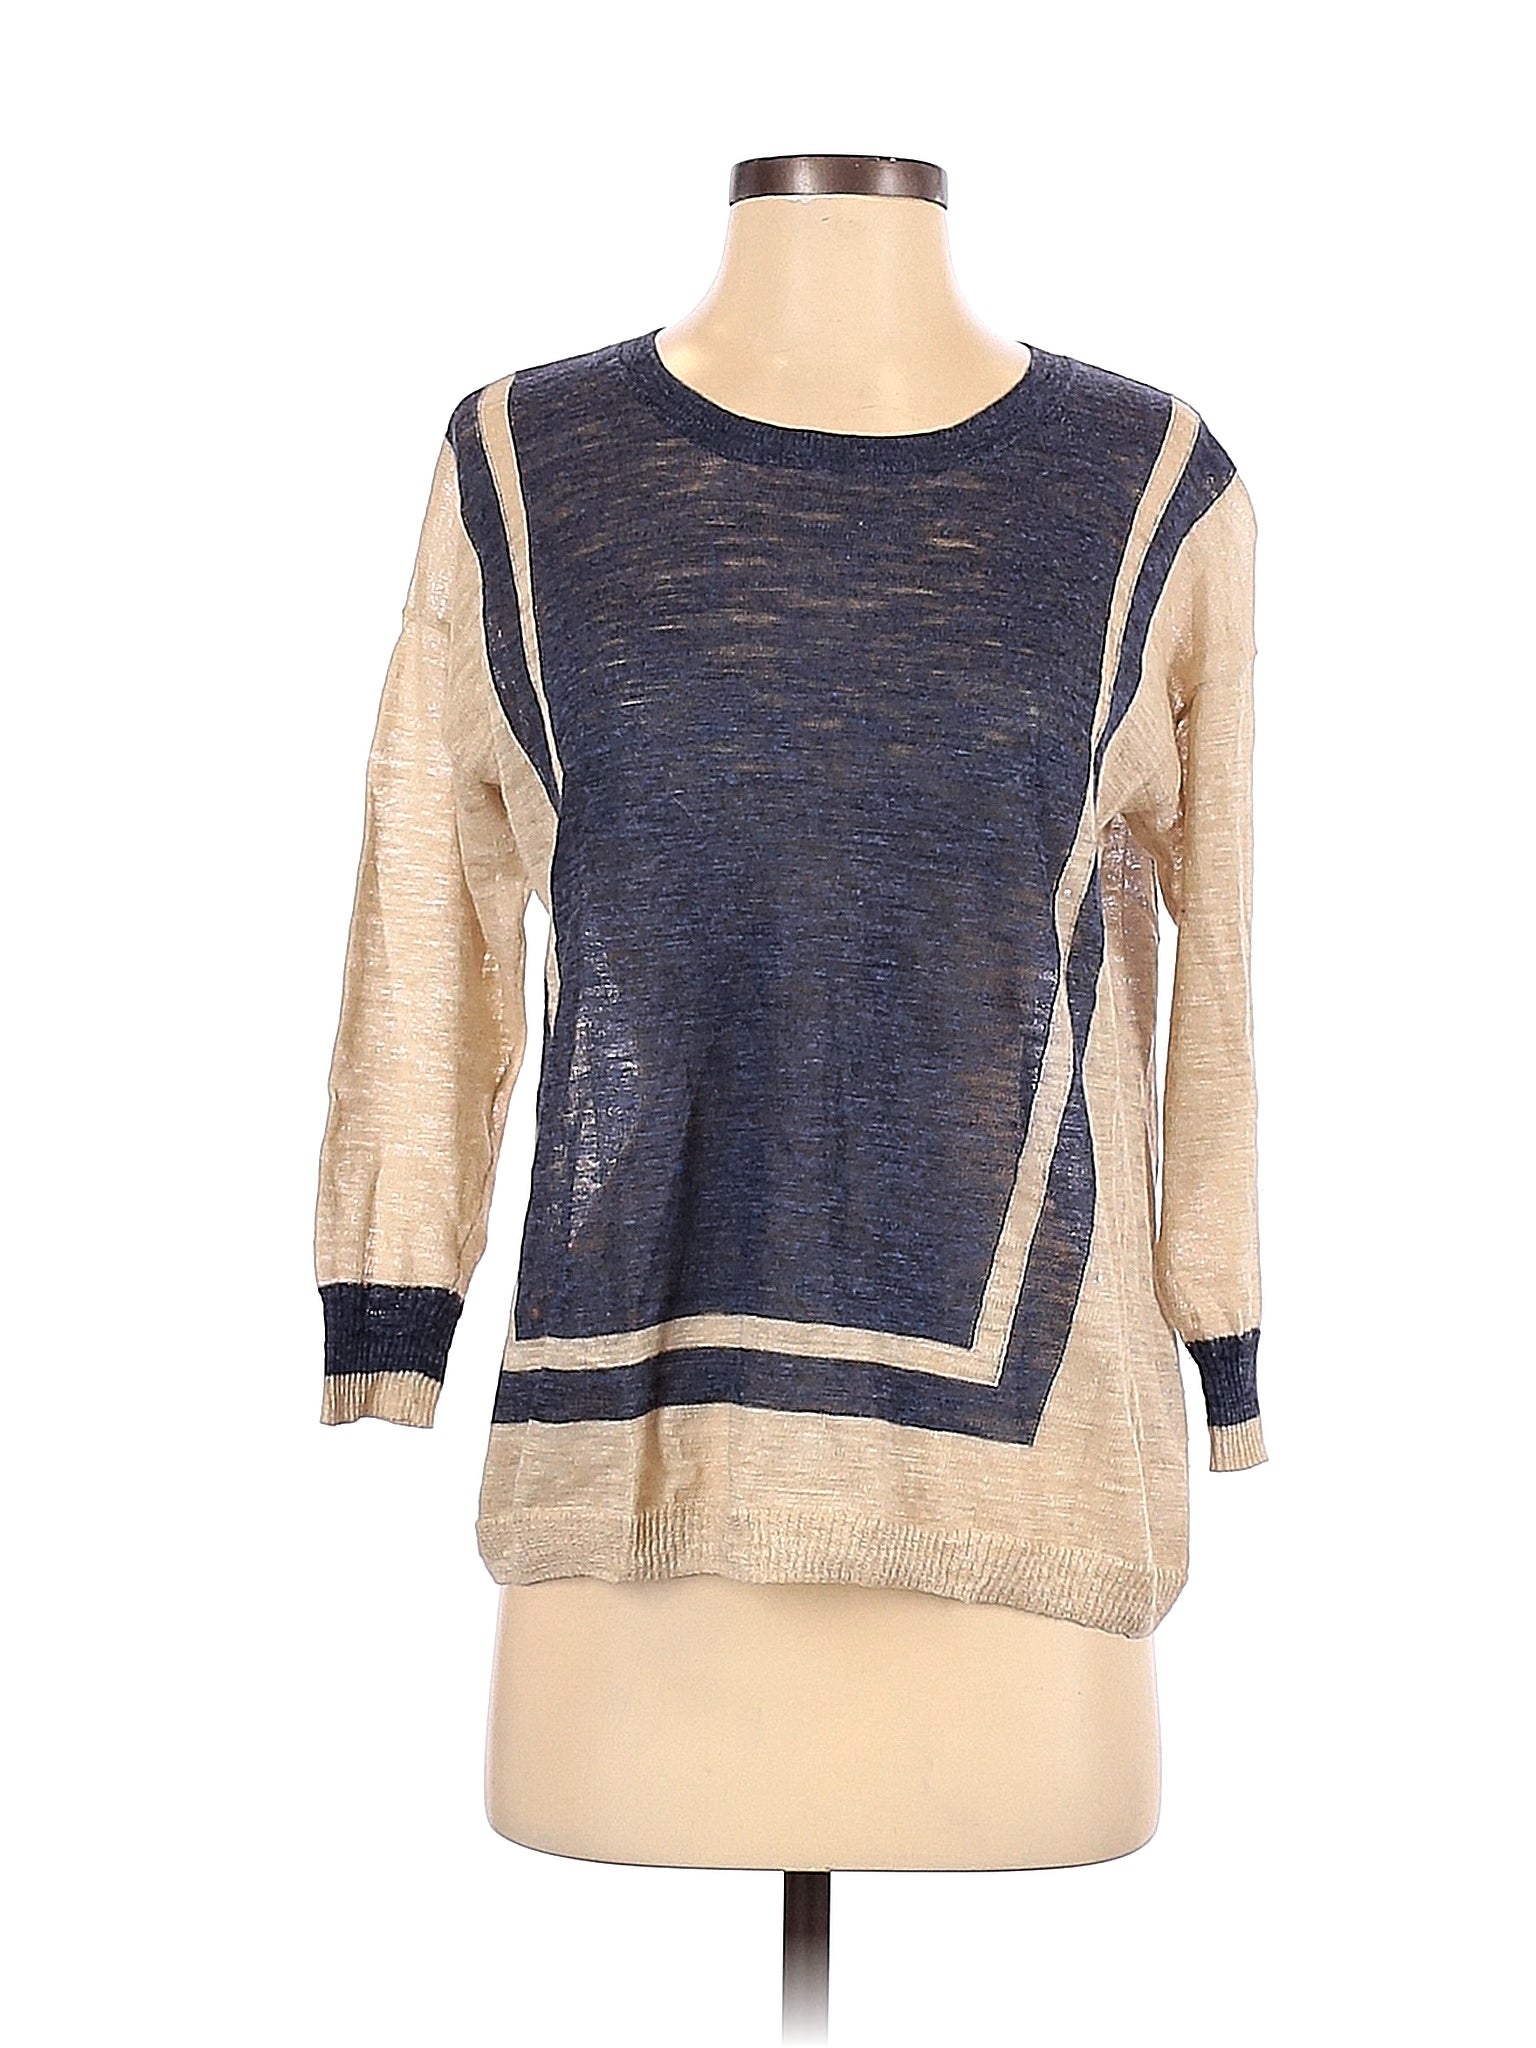 Pullover Sweater size - XS